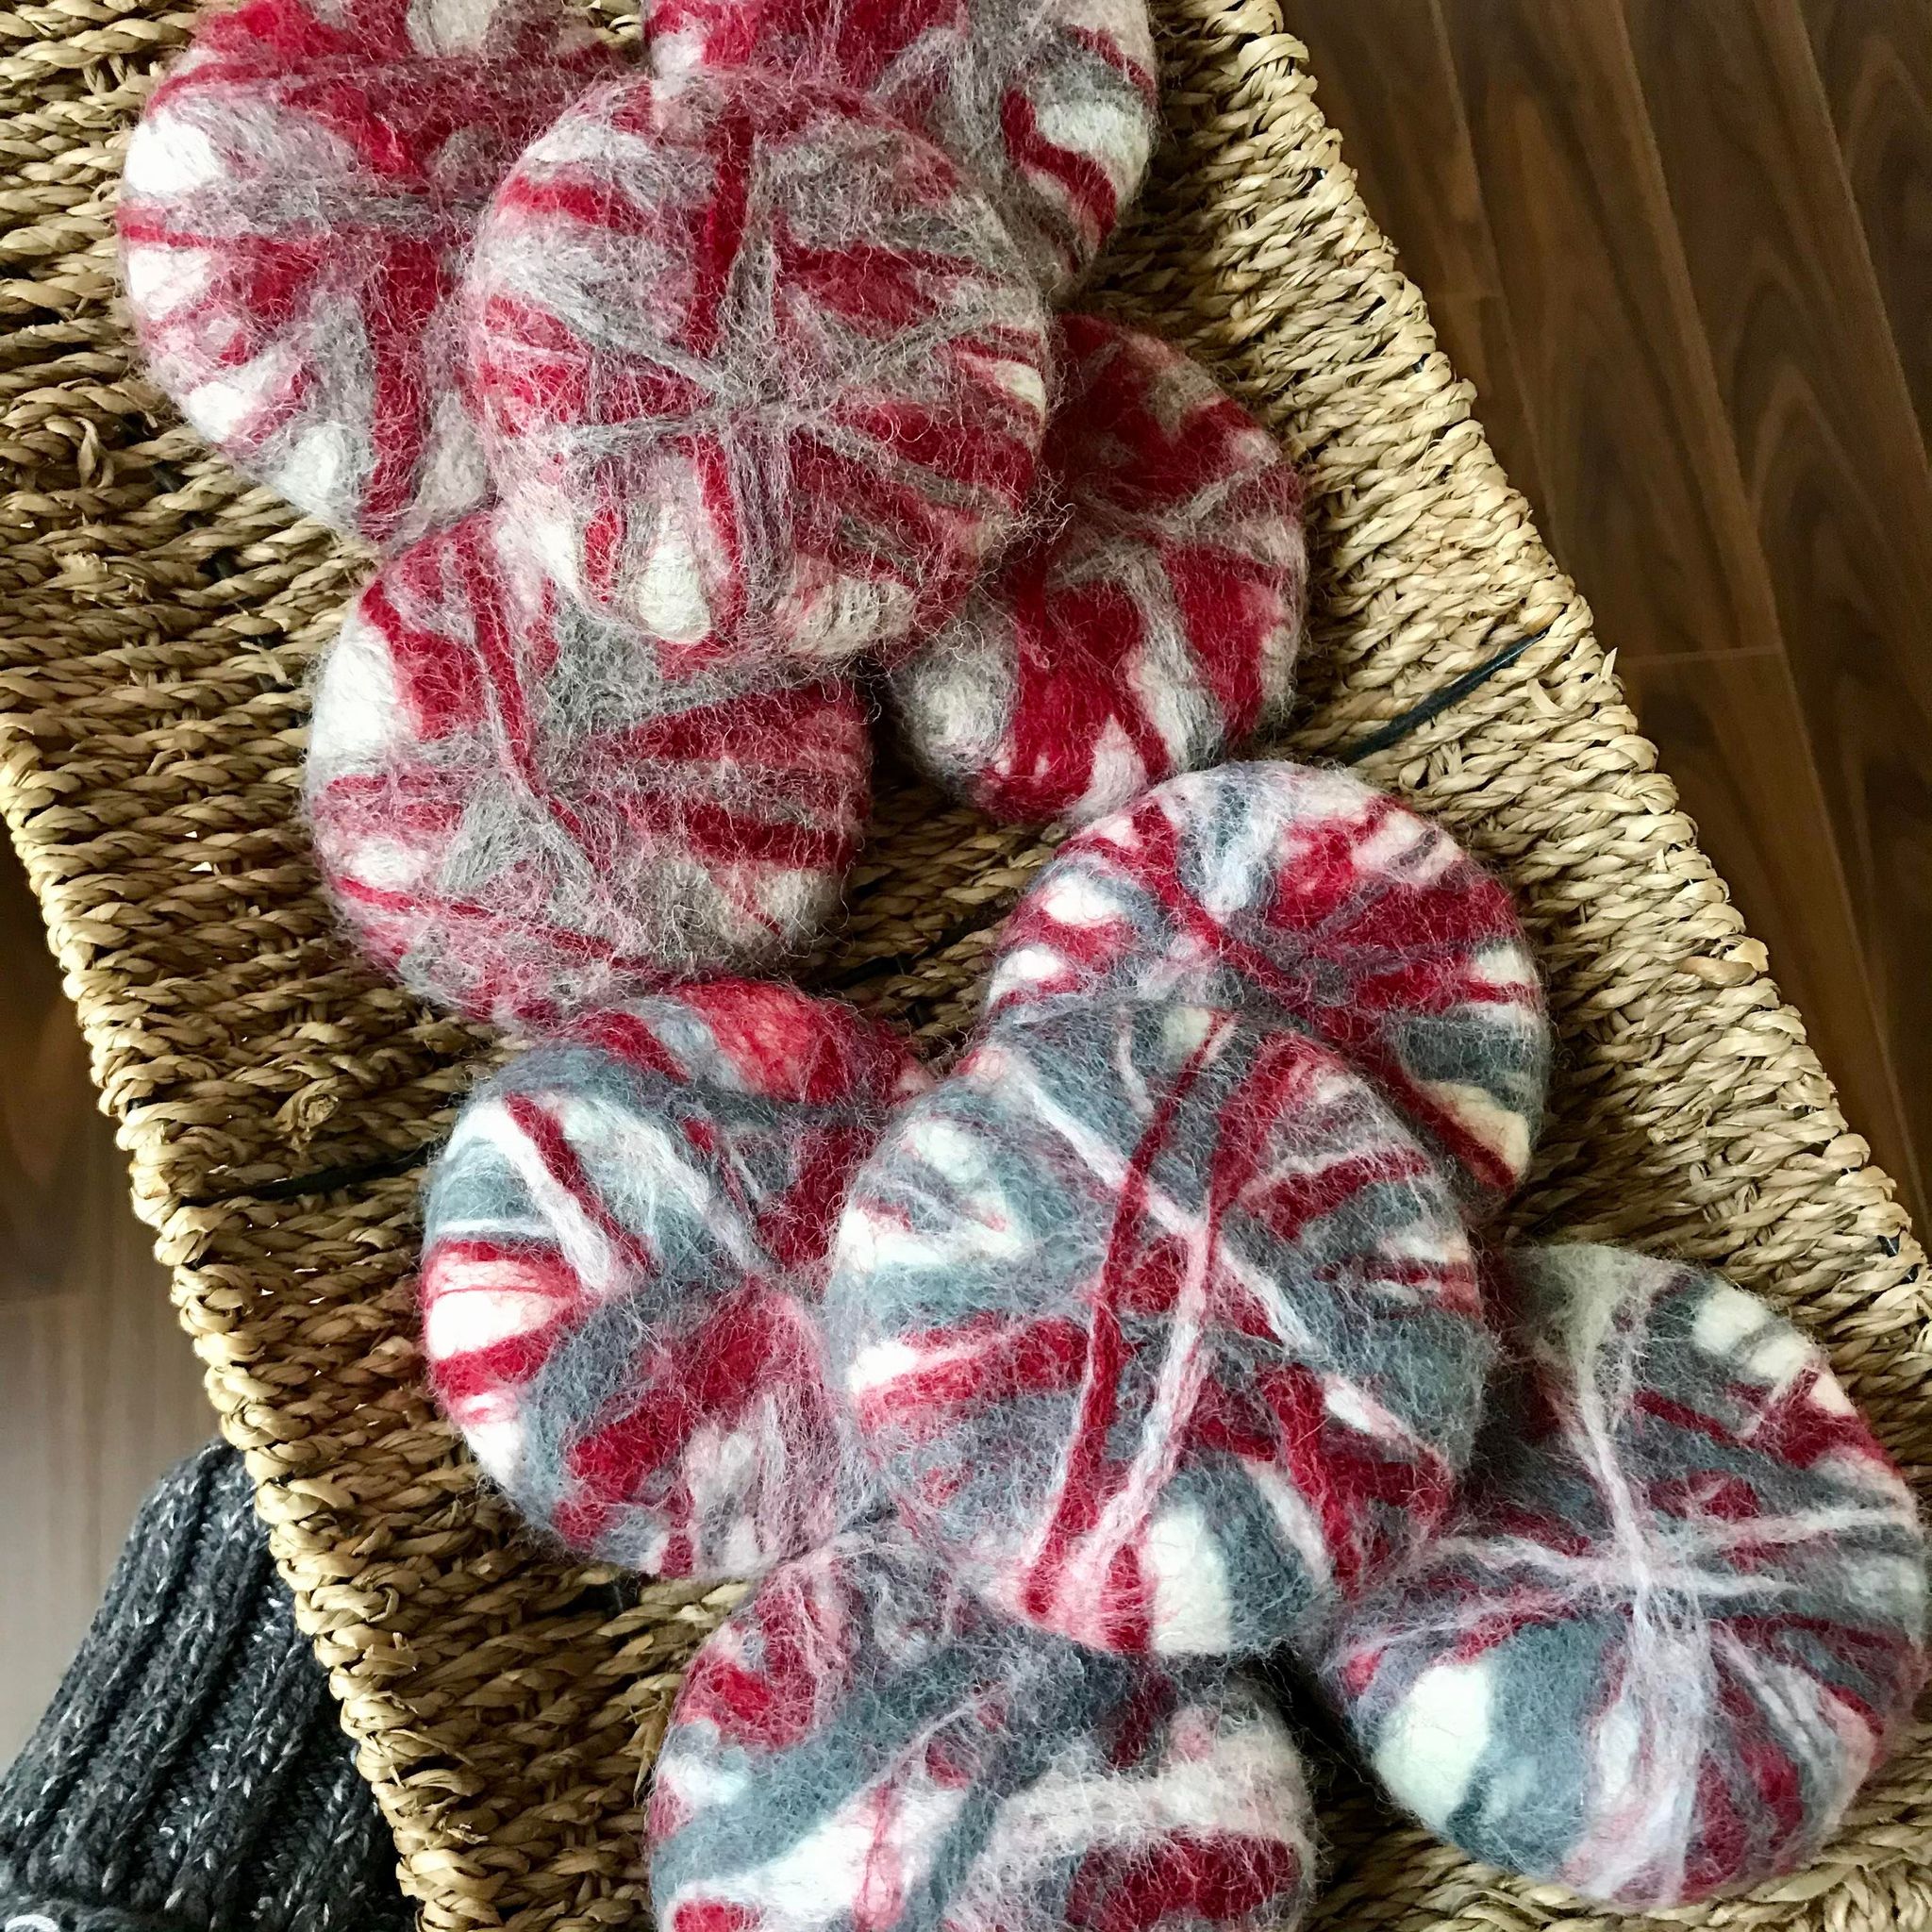 Round natural rosemary mint and lavender chamomile soaps made in Canada by Simply Natural Canada and hand felted in shades of grey, red and white